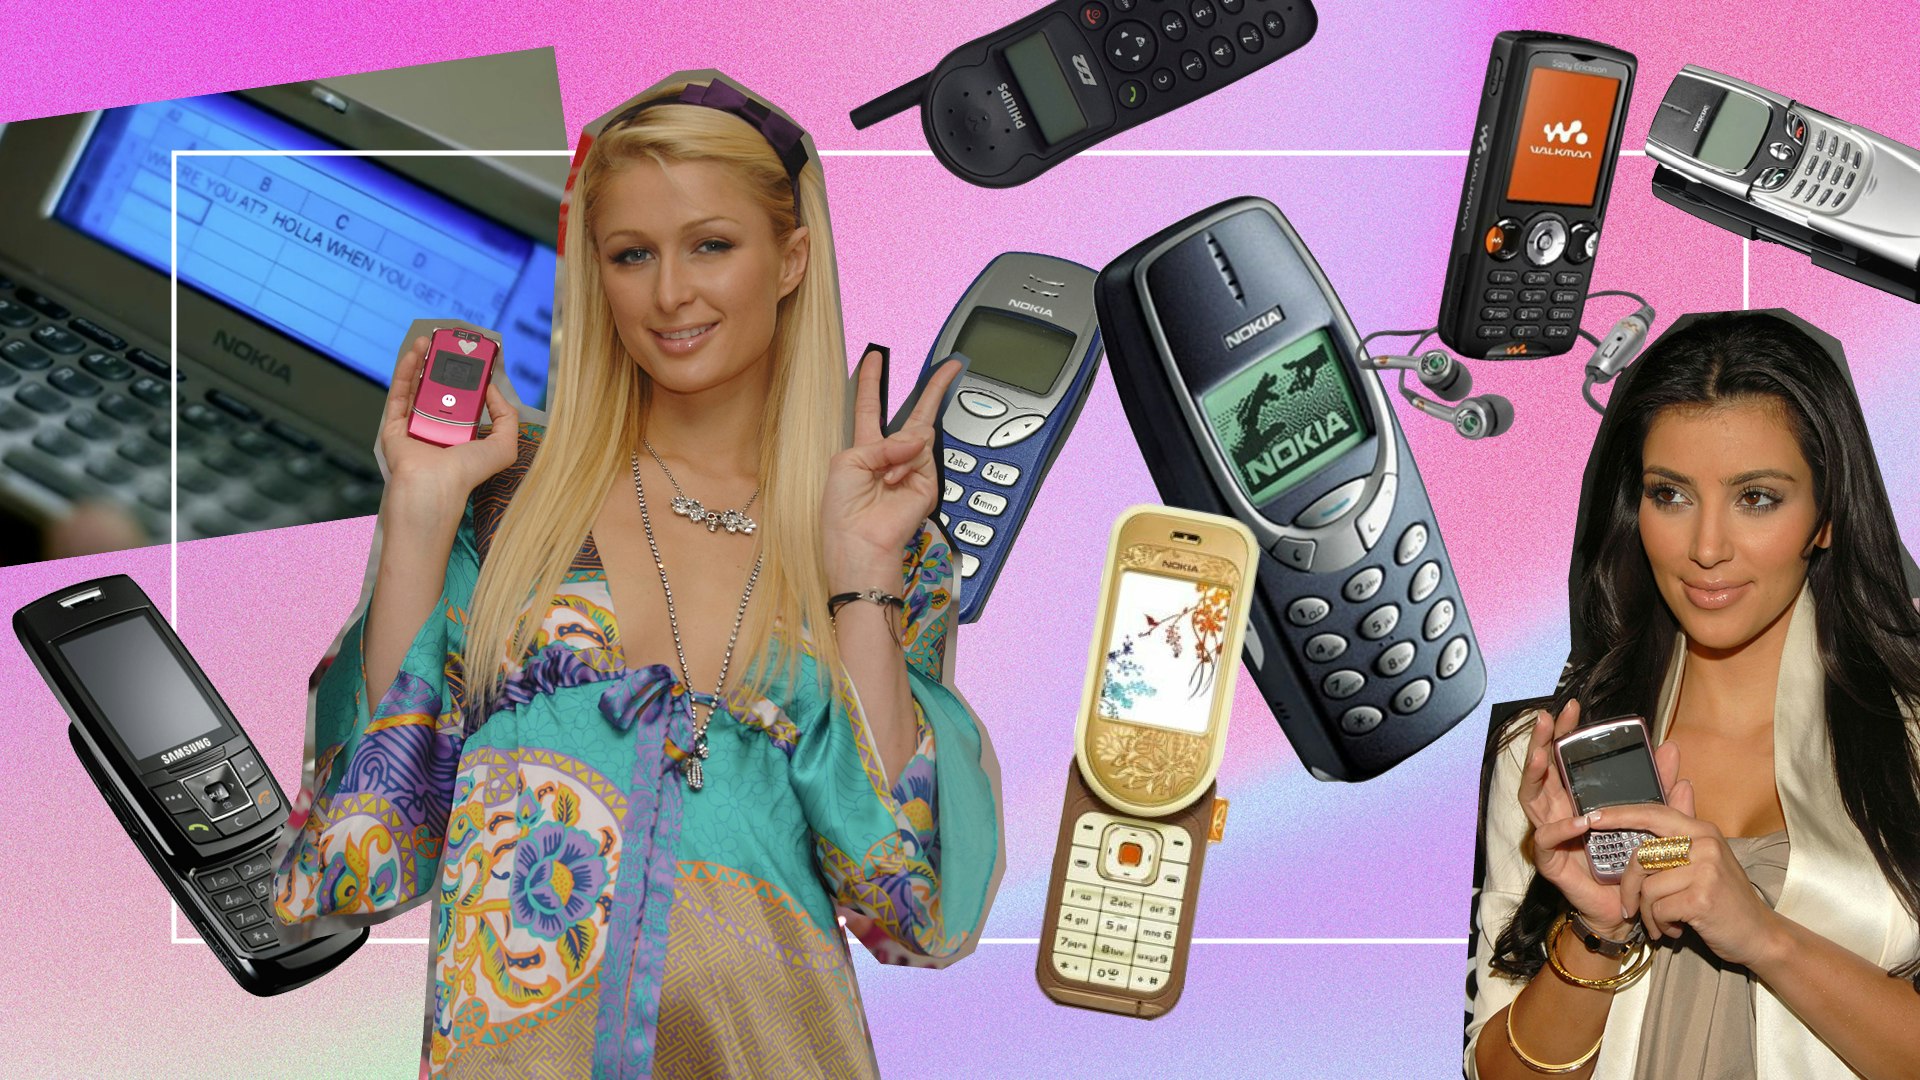 cell phones in the 2000s